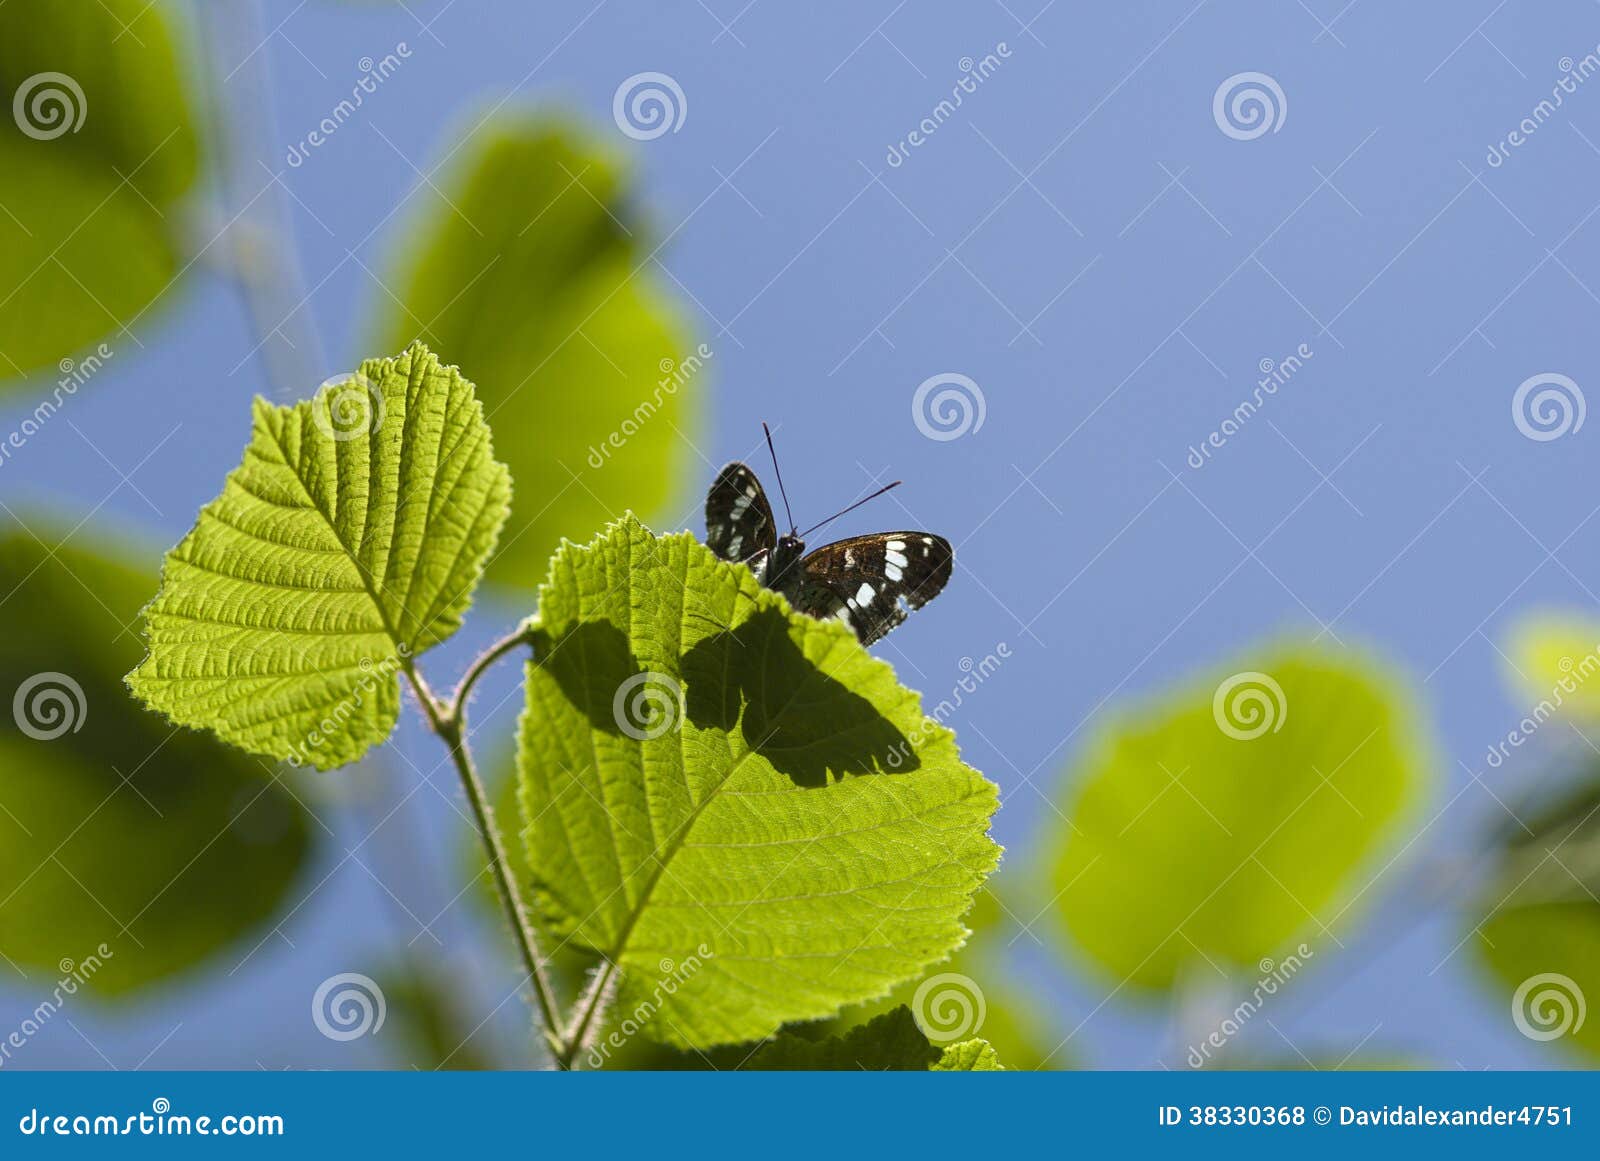 white admiral butterfly, limenitis camilla